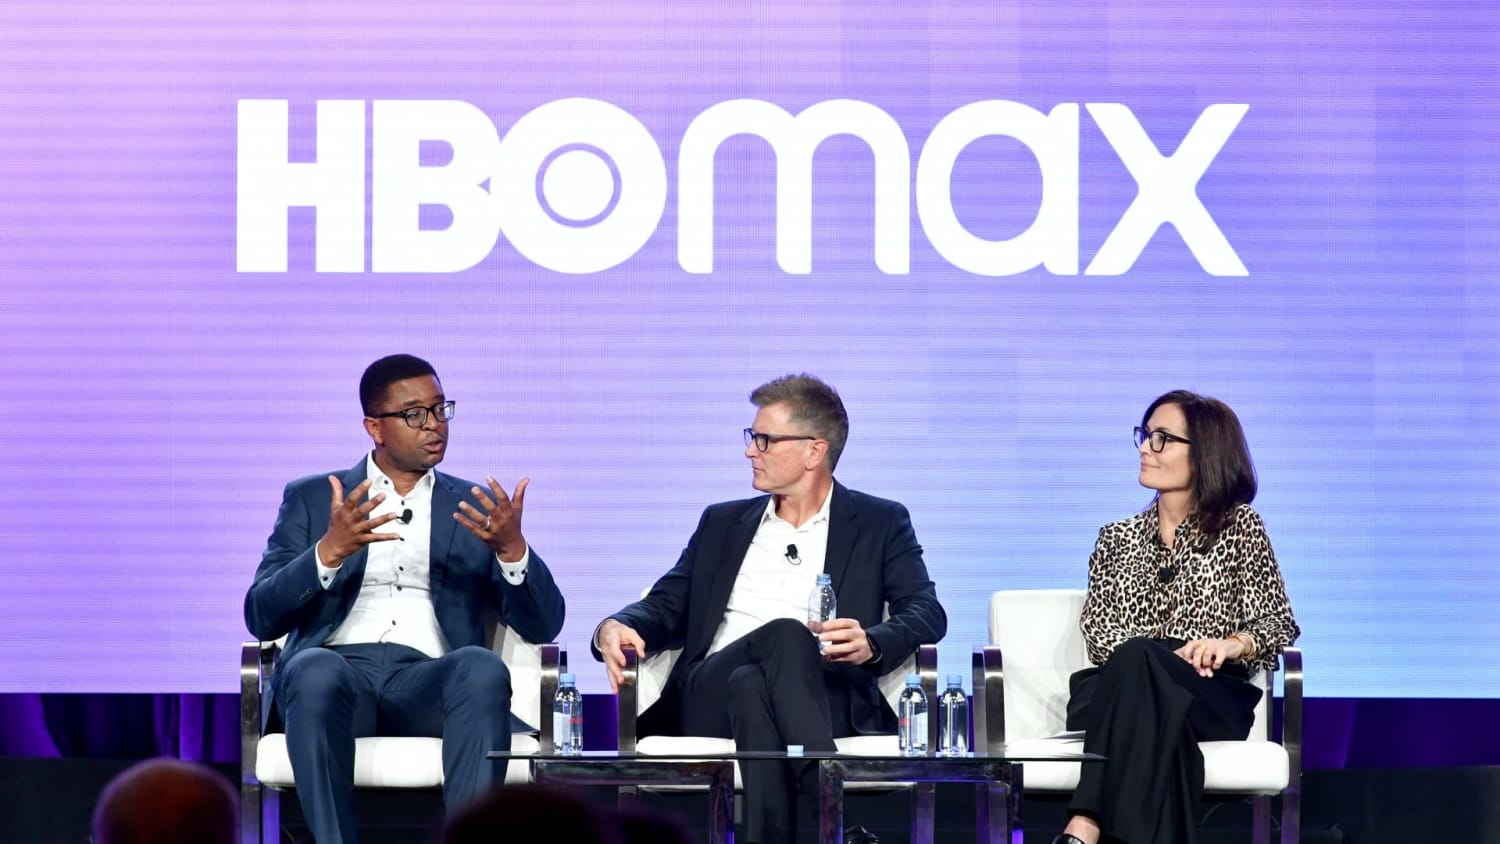 HBO Max has bumpy start, 'isn't a game changer for AT&T,' analyst says